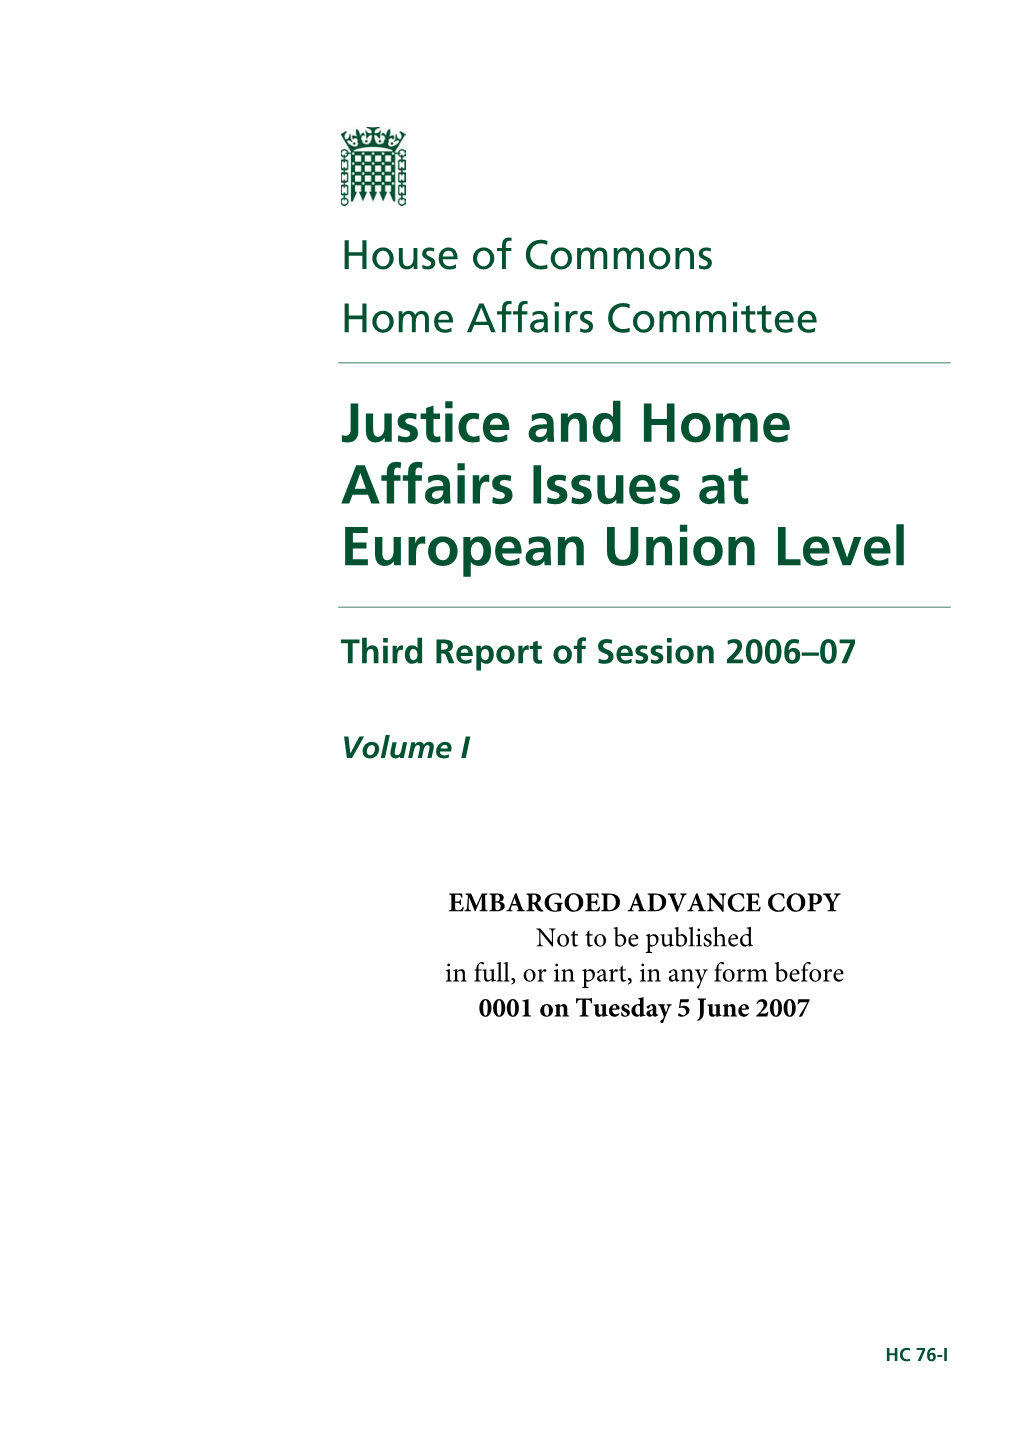 Justice and Home Affairs Issues at European Union Level